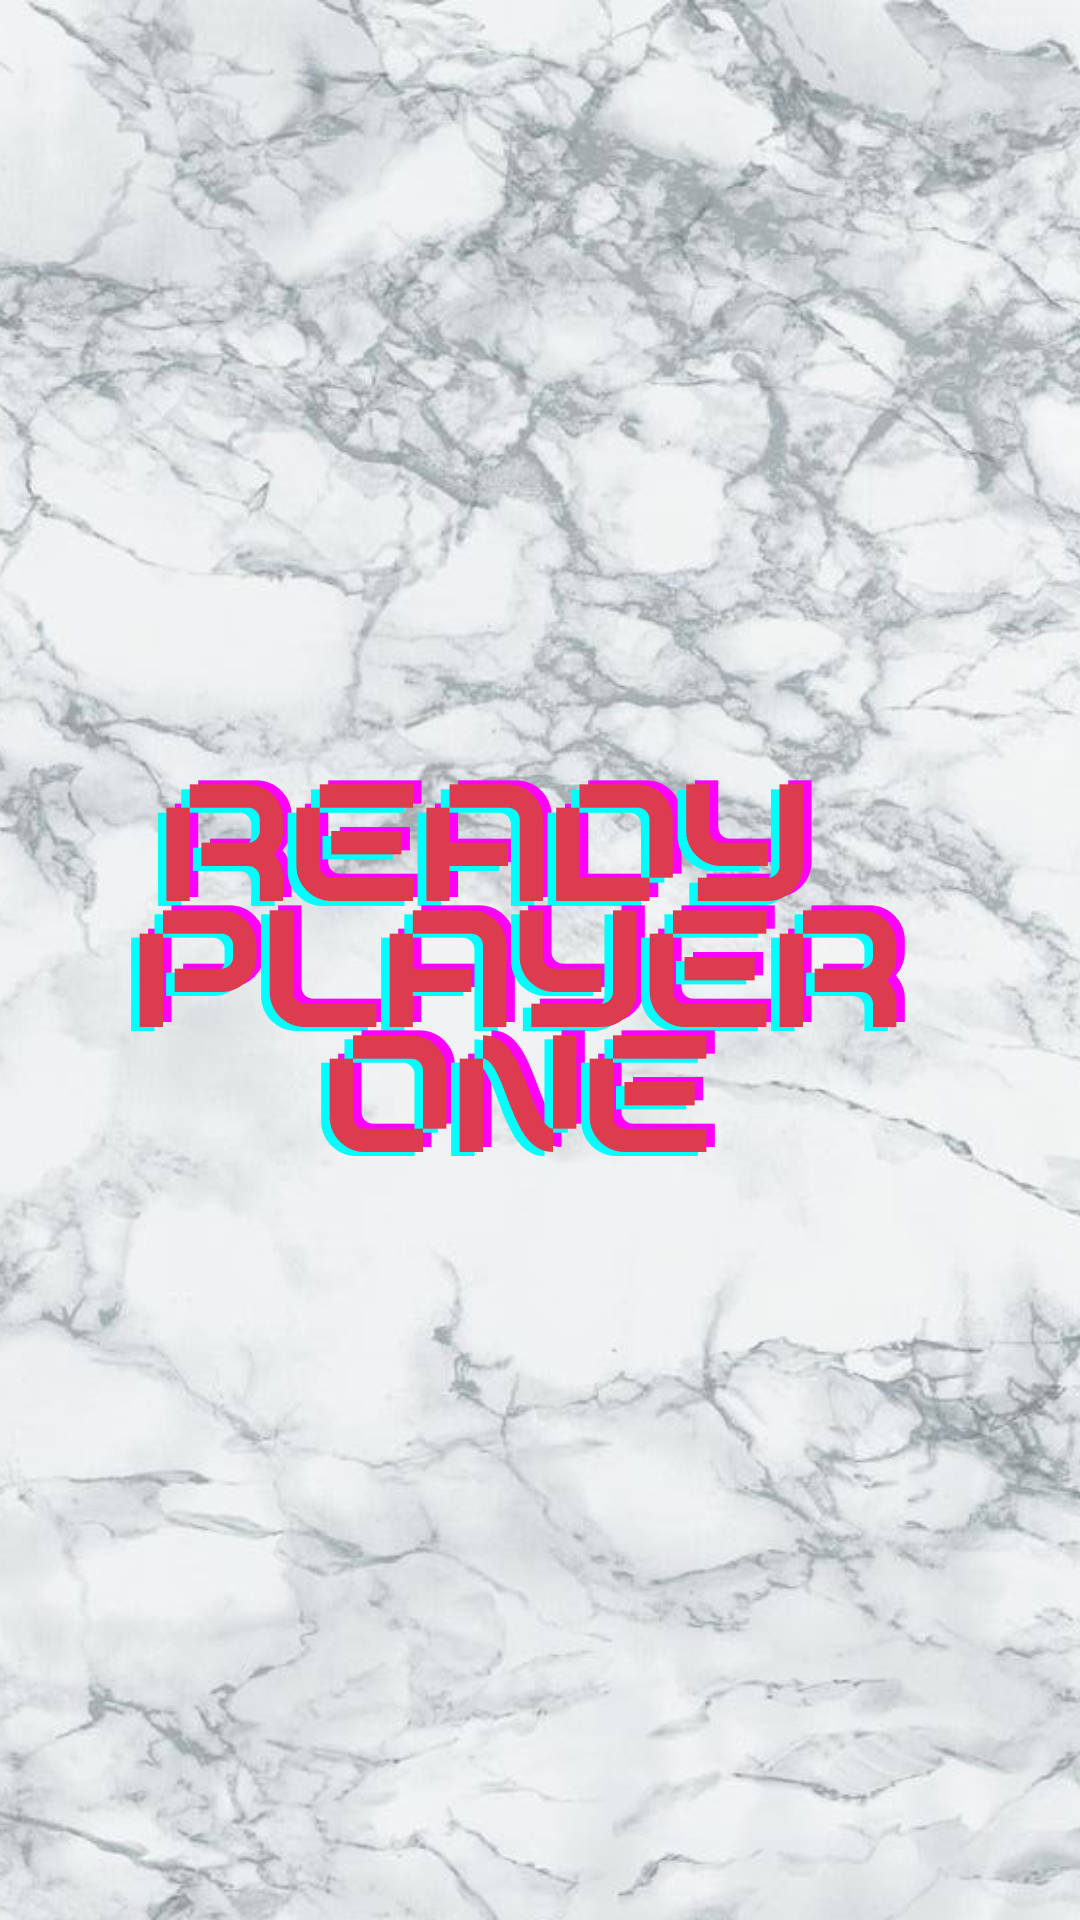 Ready Player One On White Marble Background